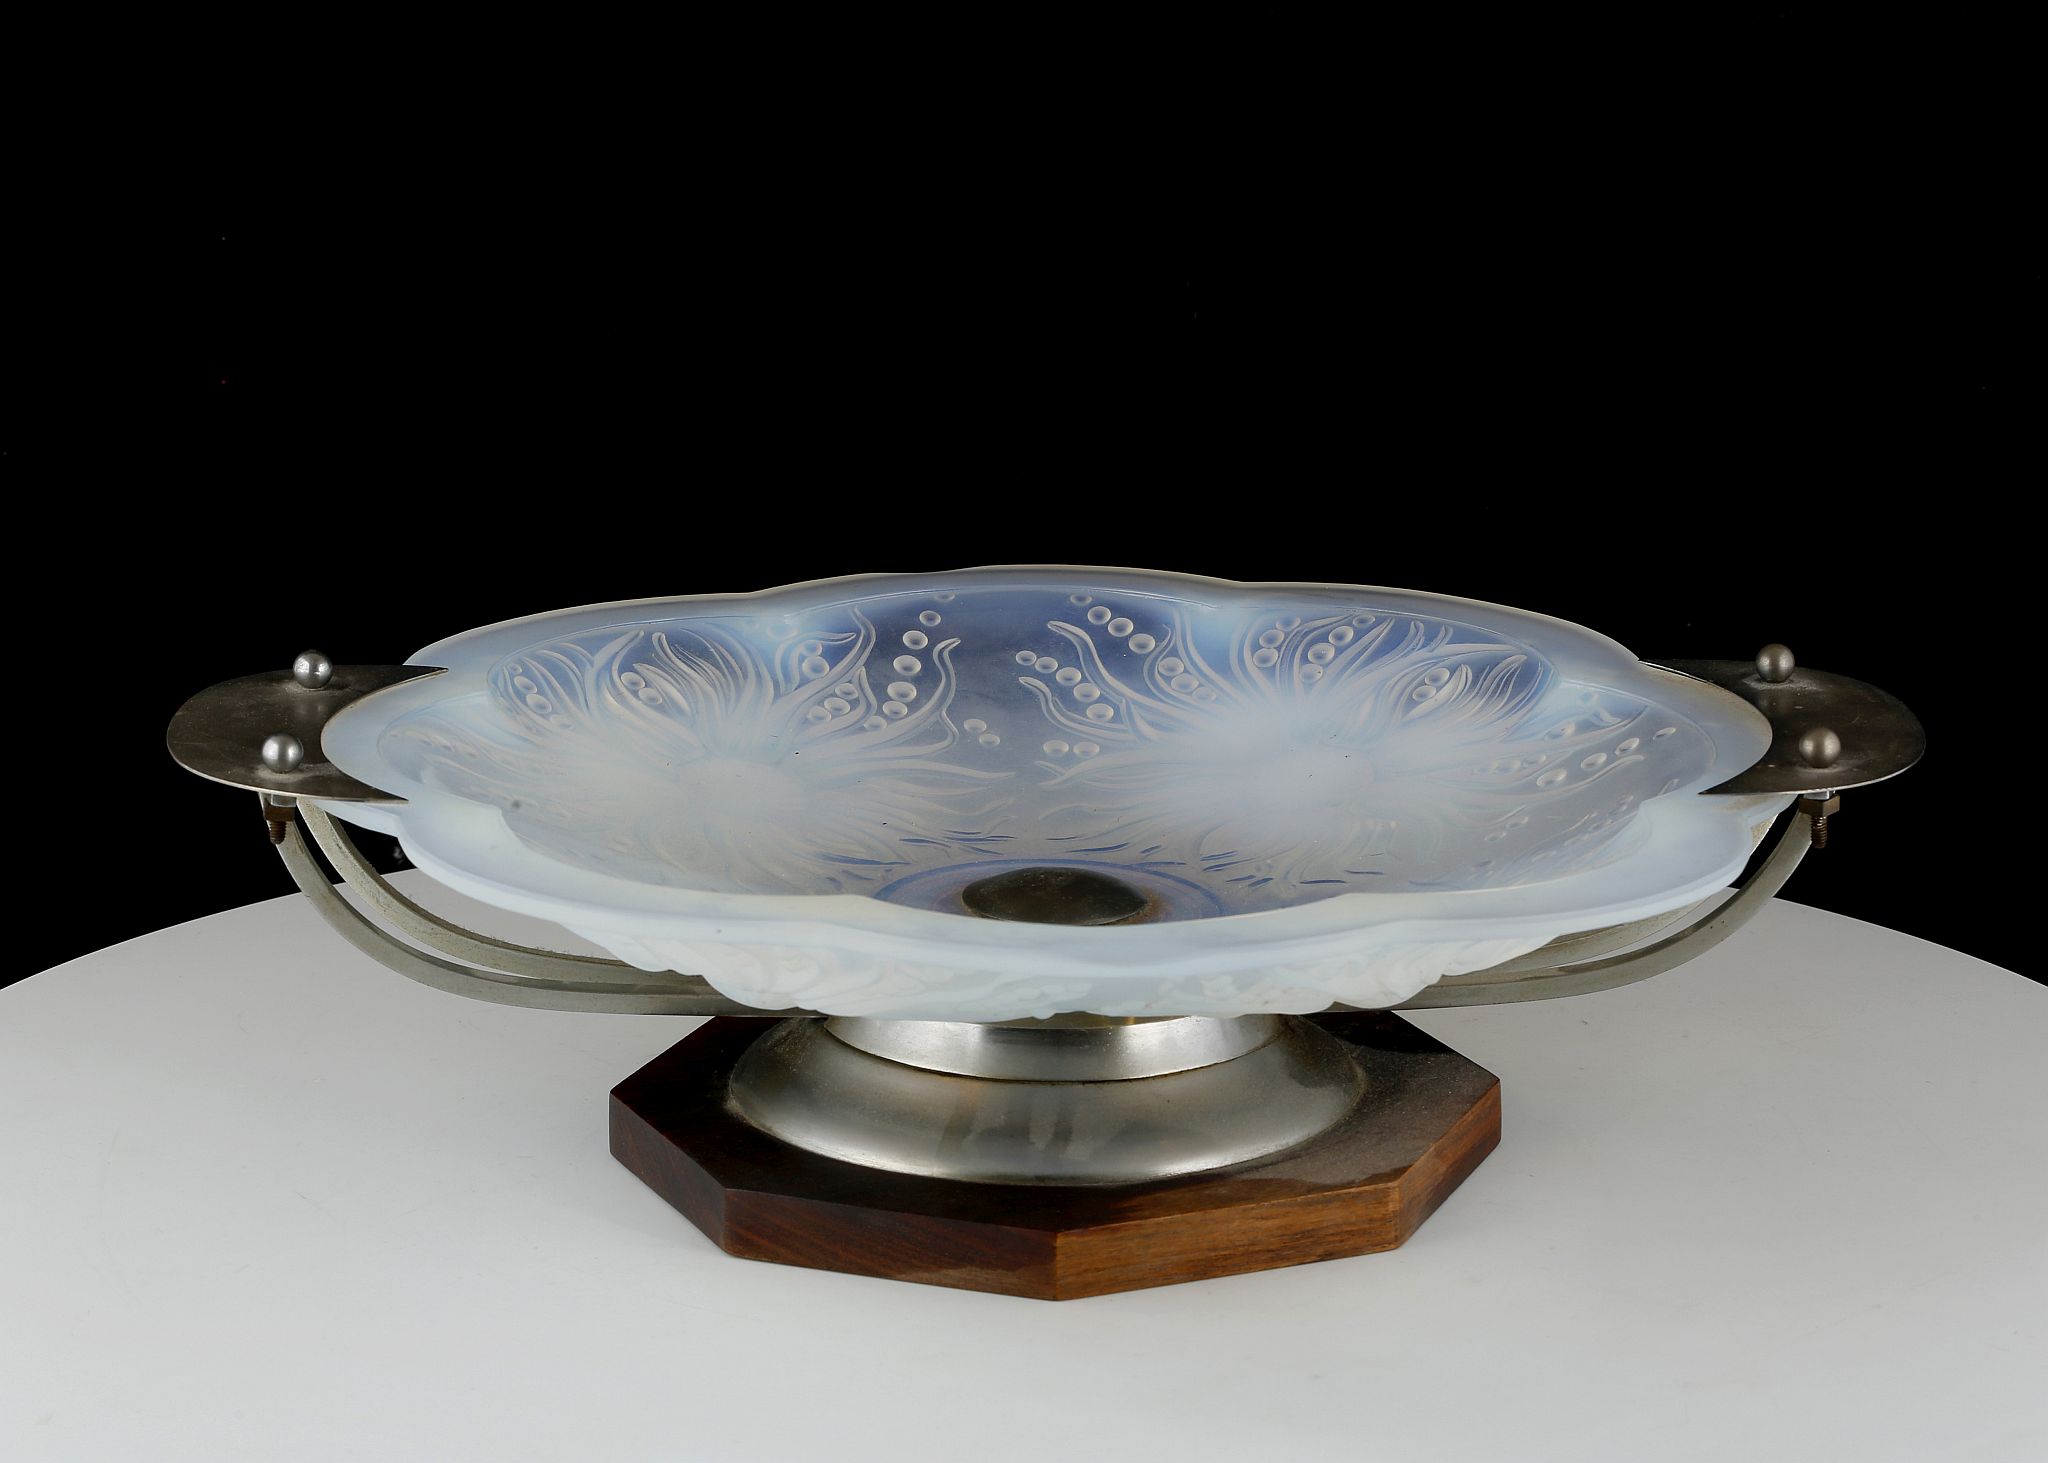 A 1930's OPALESCENT GLASS CENTREPIECE BOWL, with moulded sea urchin design, an metal mounted with